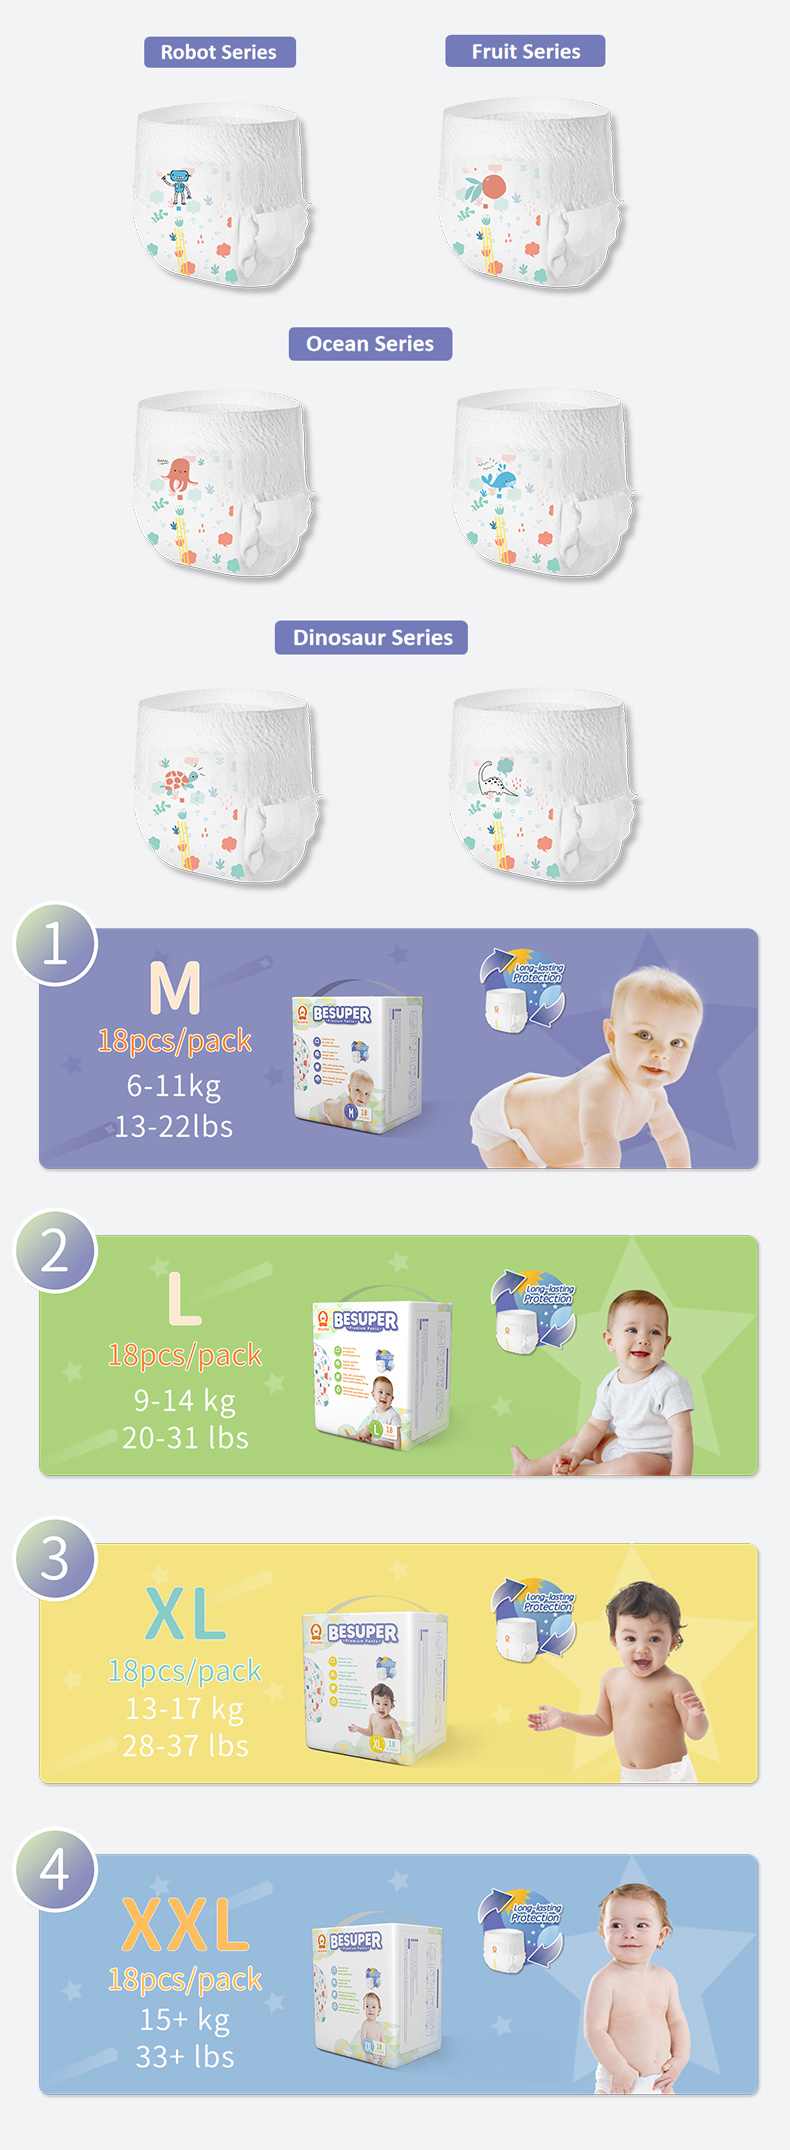 Manufacture of Various of Non-Irritating Baby Diapers for Sale